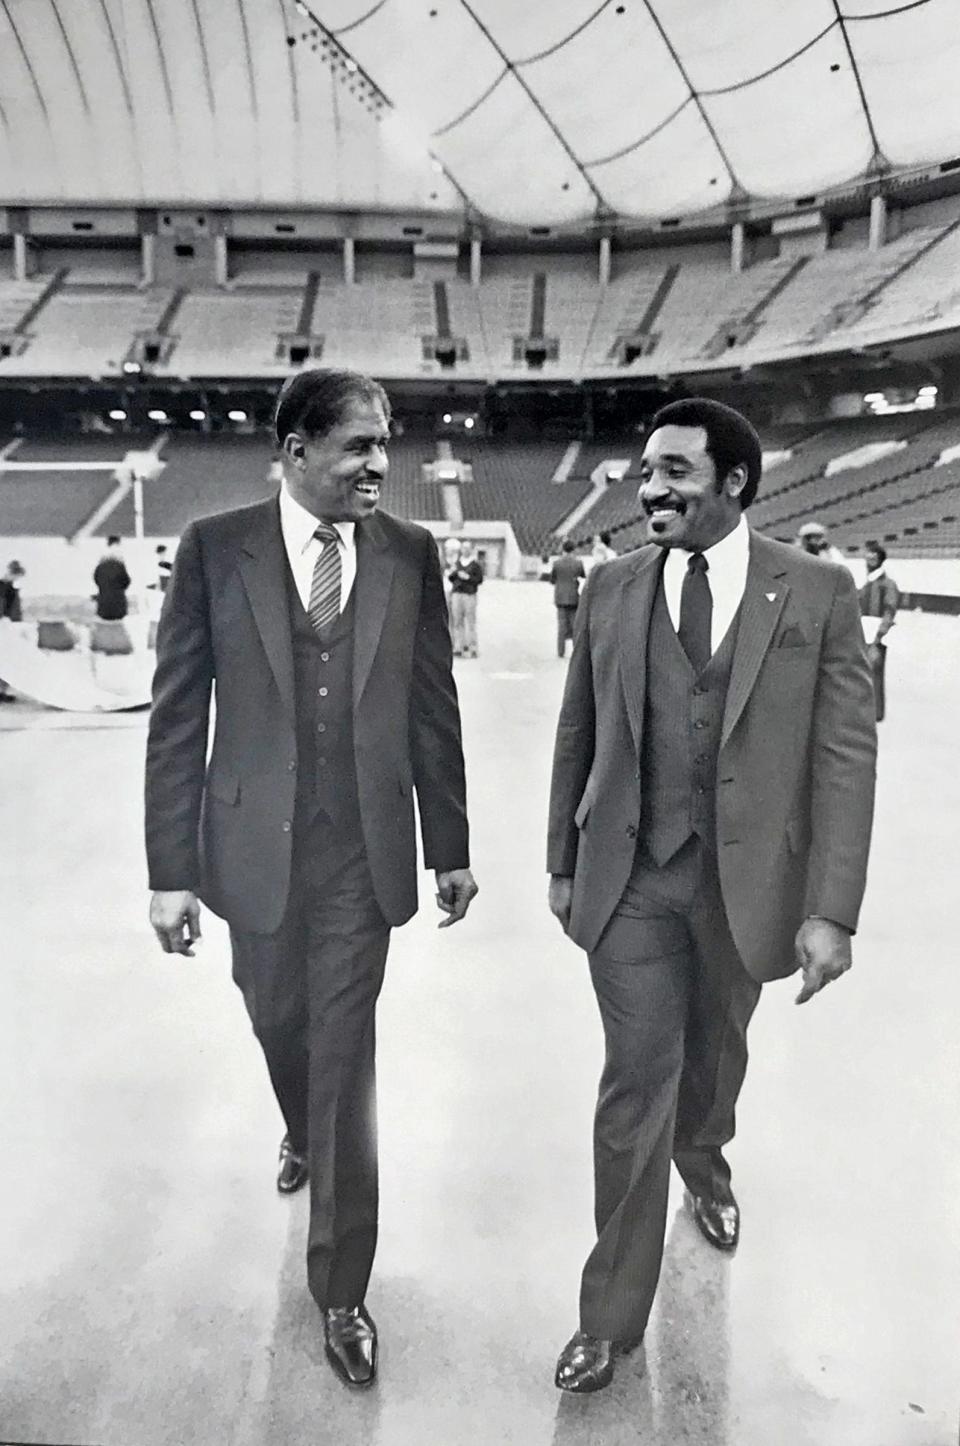 Coach Eddie Robinson of Grambling State University, left, and Mississippi Coach Archie Cooley walk in the Hoosier Dome ahead of the first Circle City Classic football game in 1984.